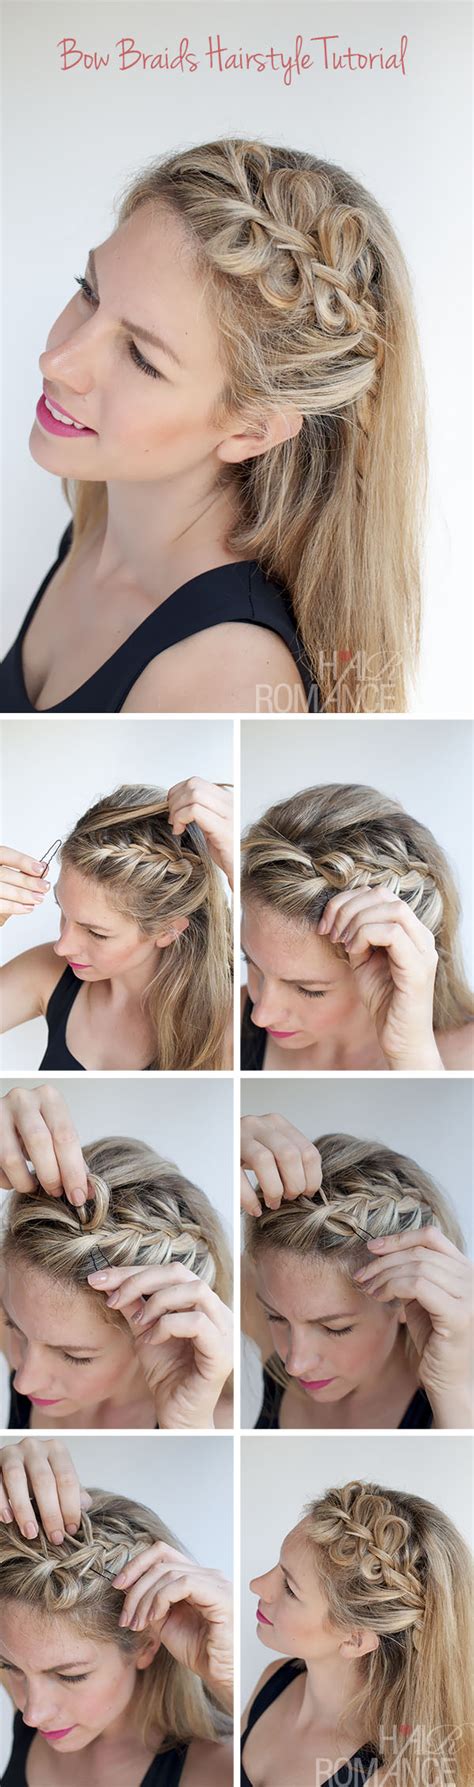 If there are any questions, suggestions or tips please let me know in the comments. Bow Braids Hairstyle Tutorial - Hair Romance